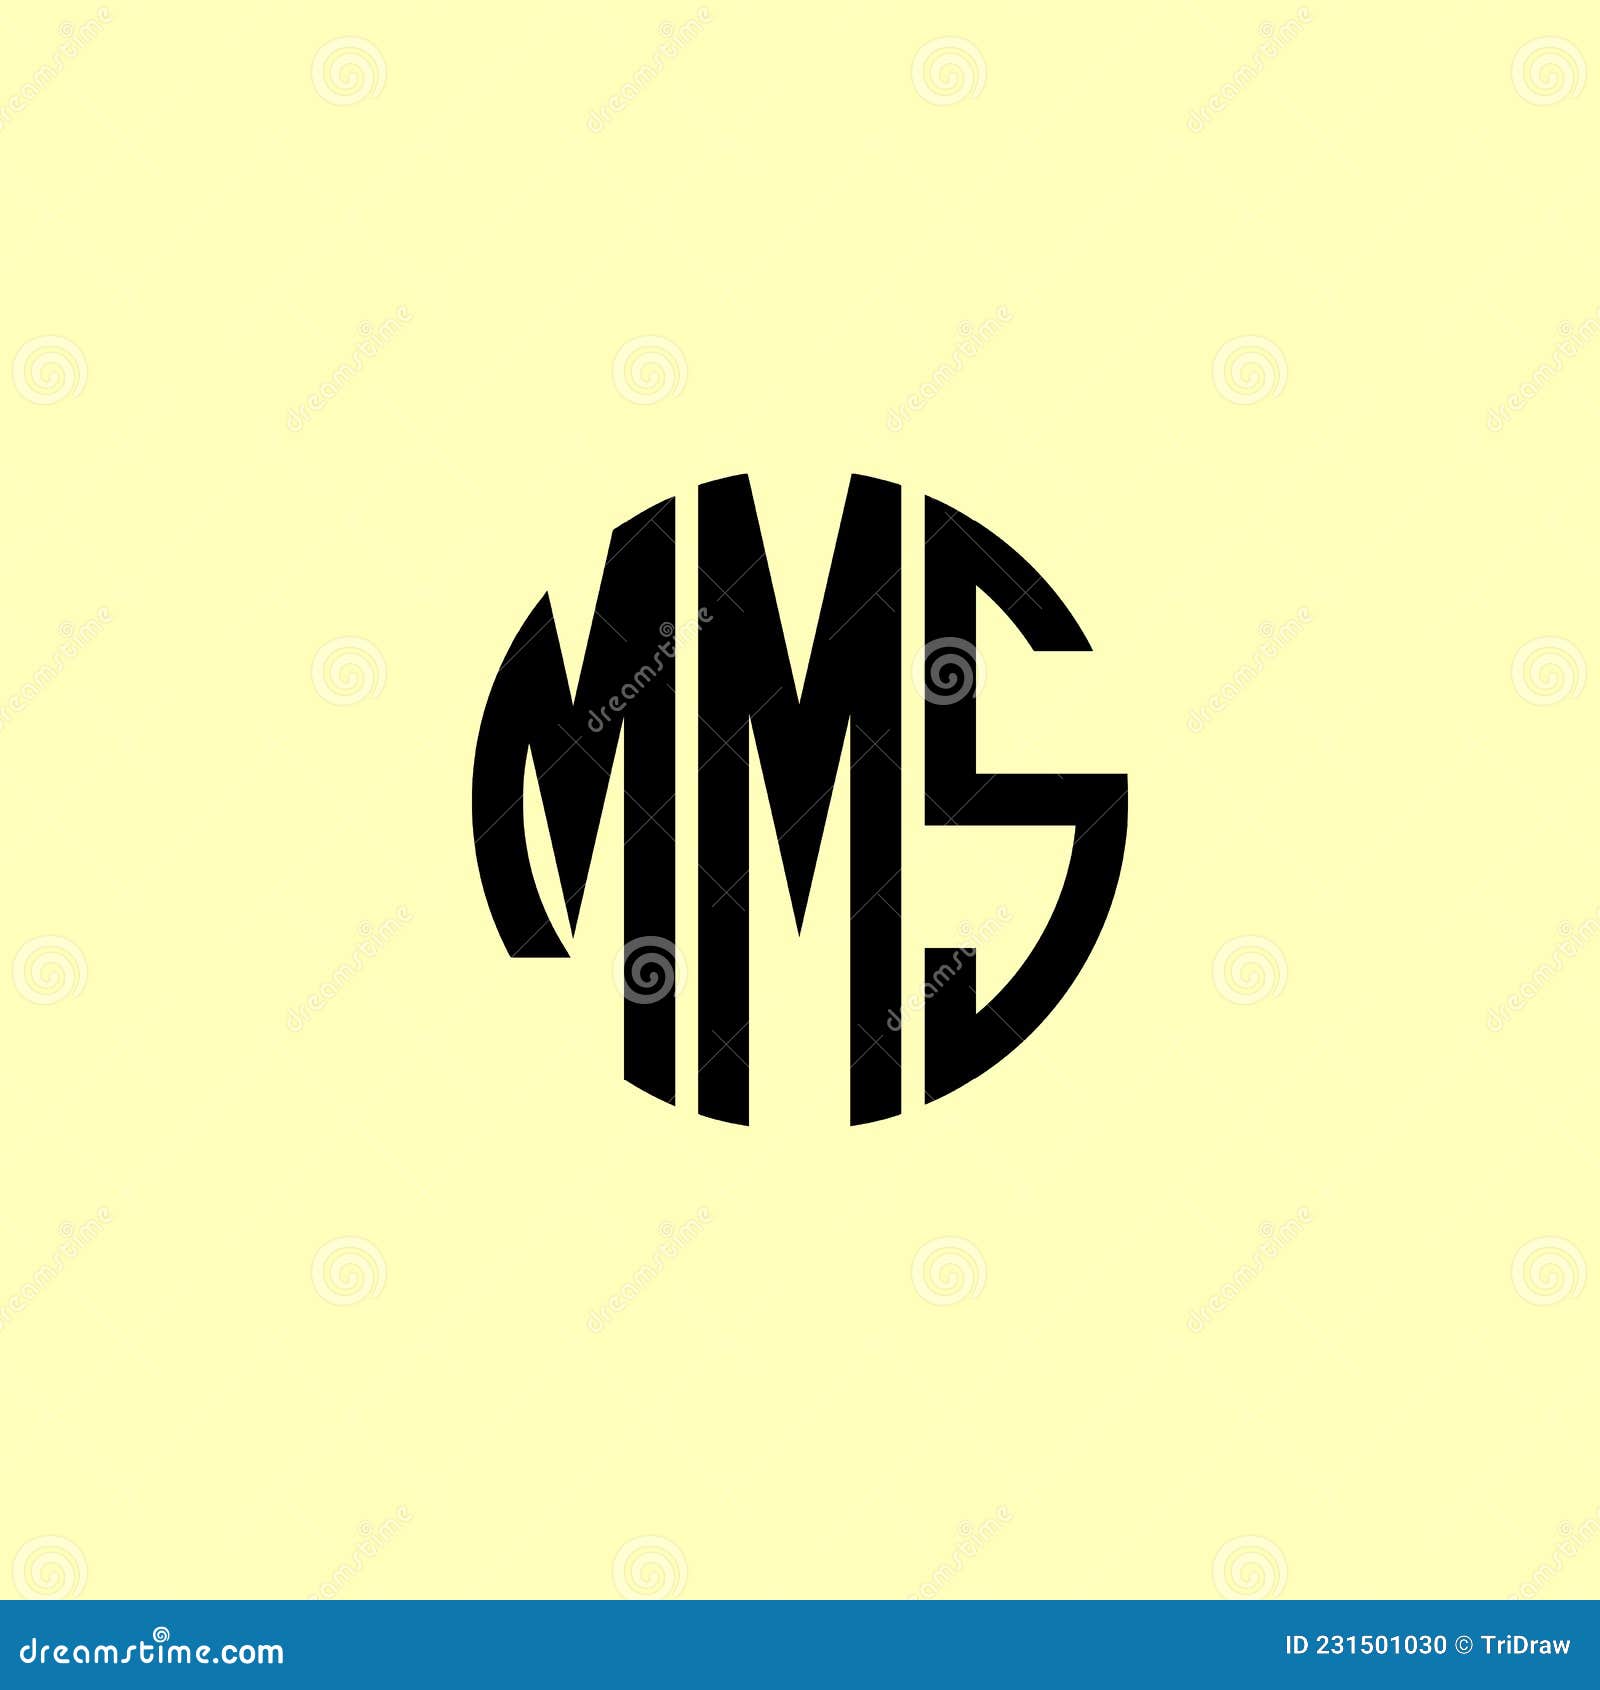 creative rounded initial letters mms logo